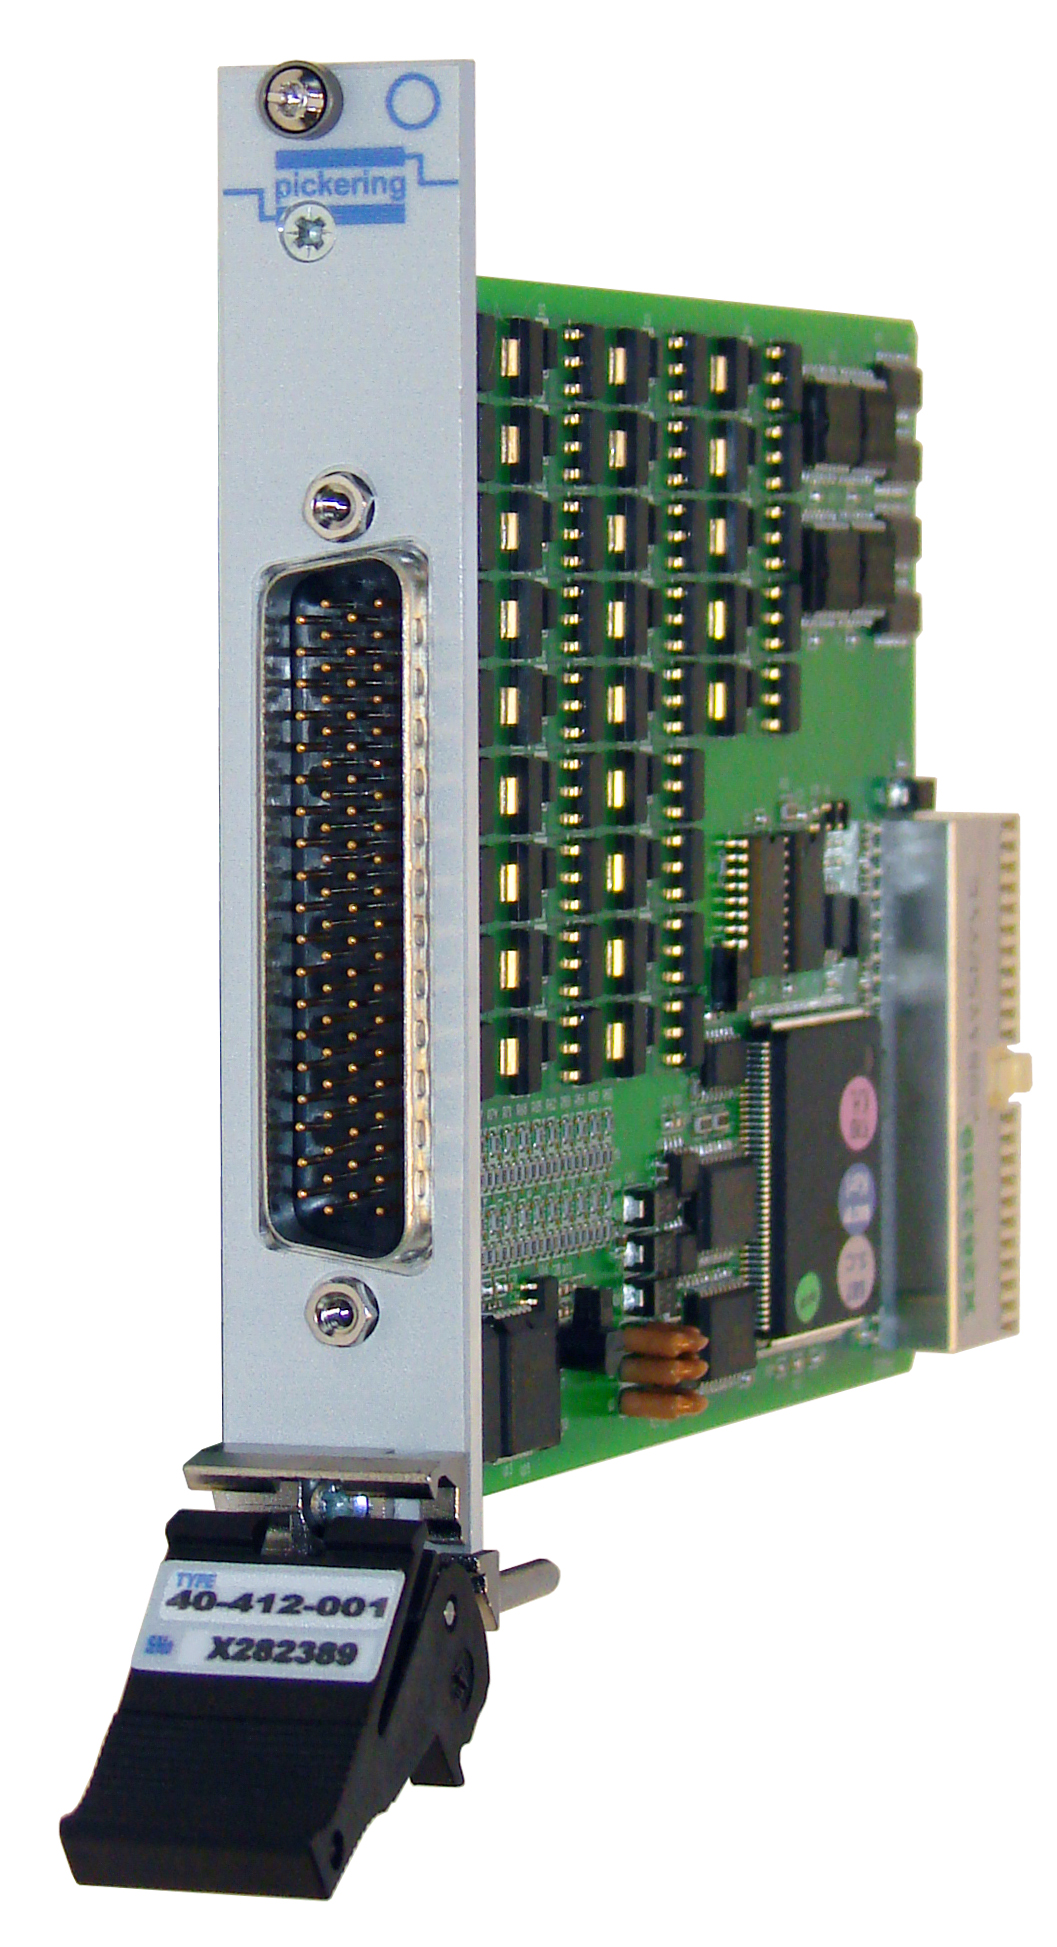 Front panel of PXI card 40-412